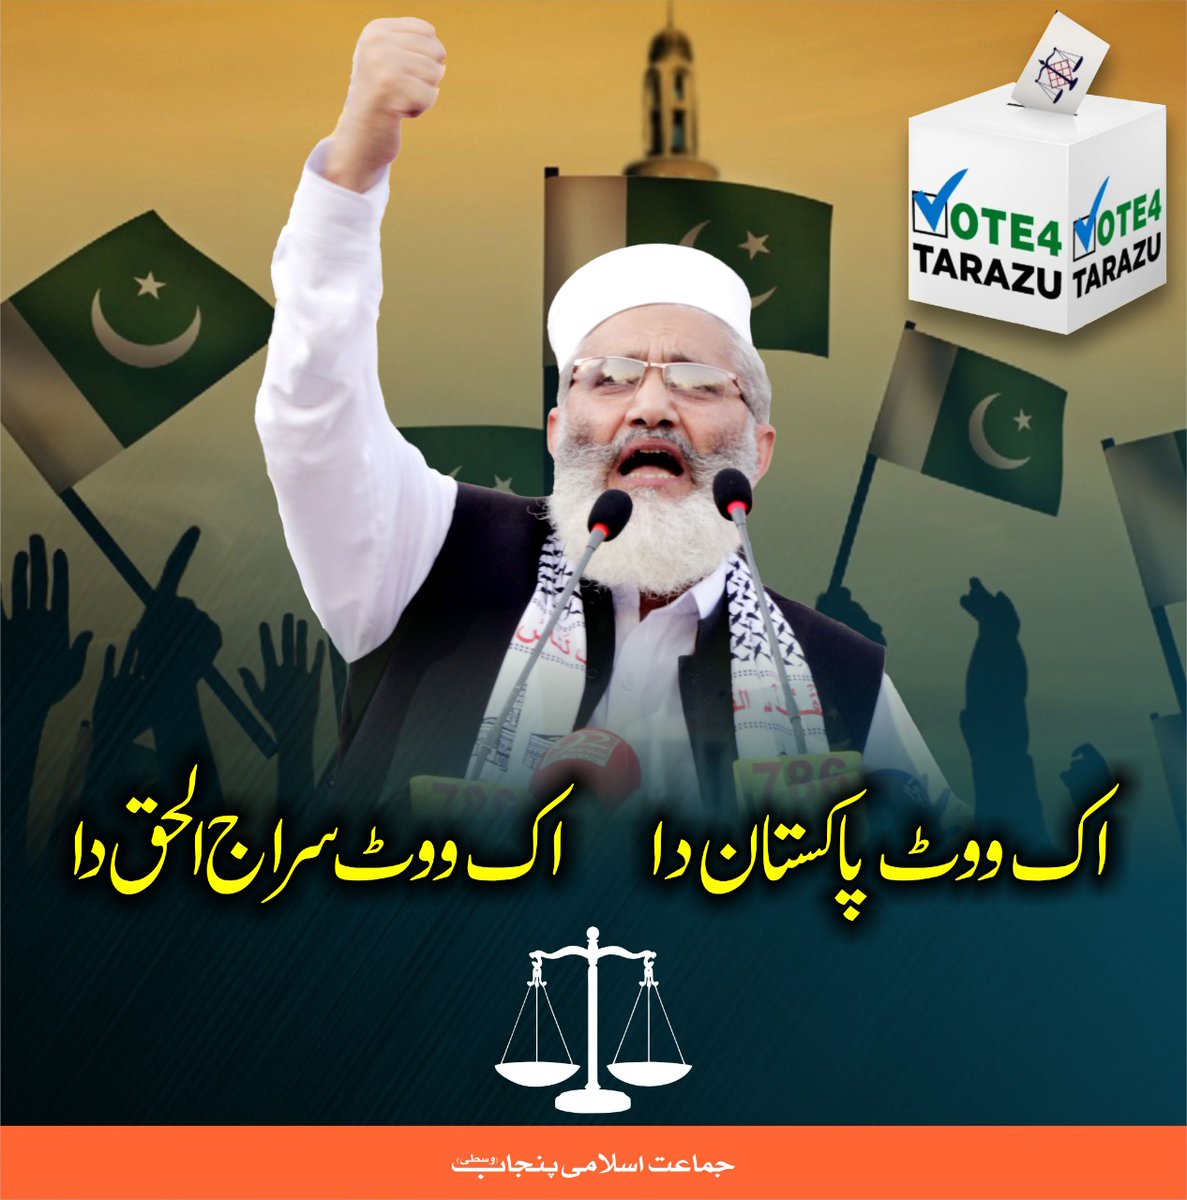 To get the due rights of 4 million contractual women workers in industry. Vote for TARAZU #امیدہےجماعت_اسلامی